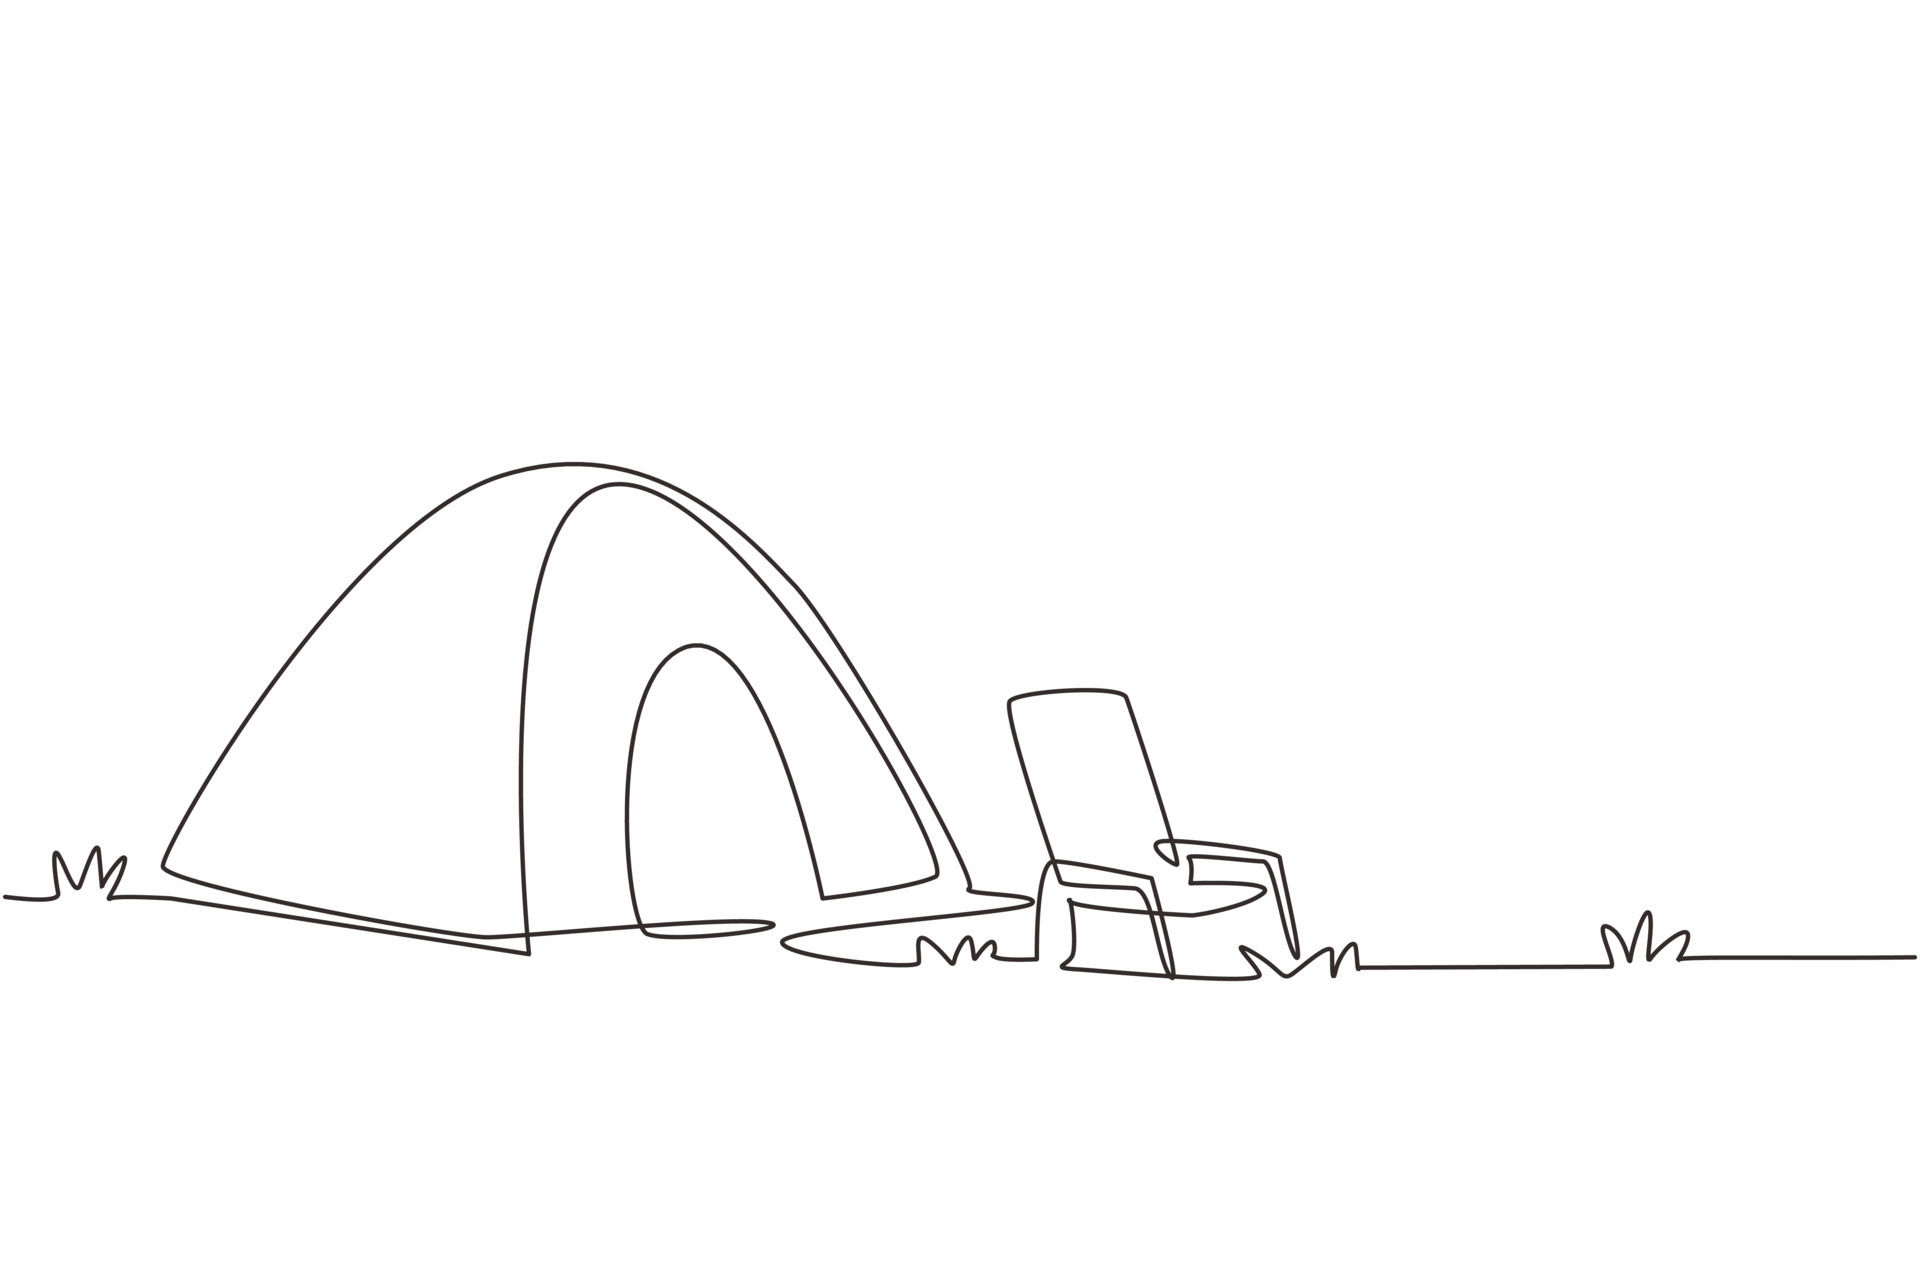 Tent Coloring Cartoon Character Is Inside His Tent Outline Sketch Drawing  Vector Camping Drawing Camping Outline Camping Sketch PNG and Vector  with Transparent Background for Free Download